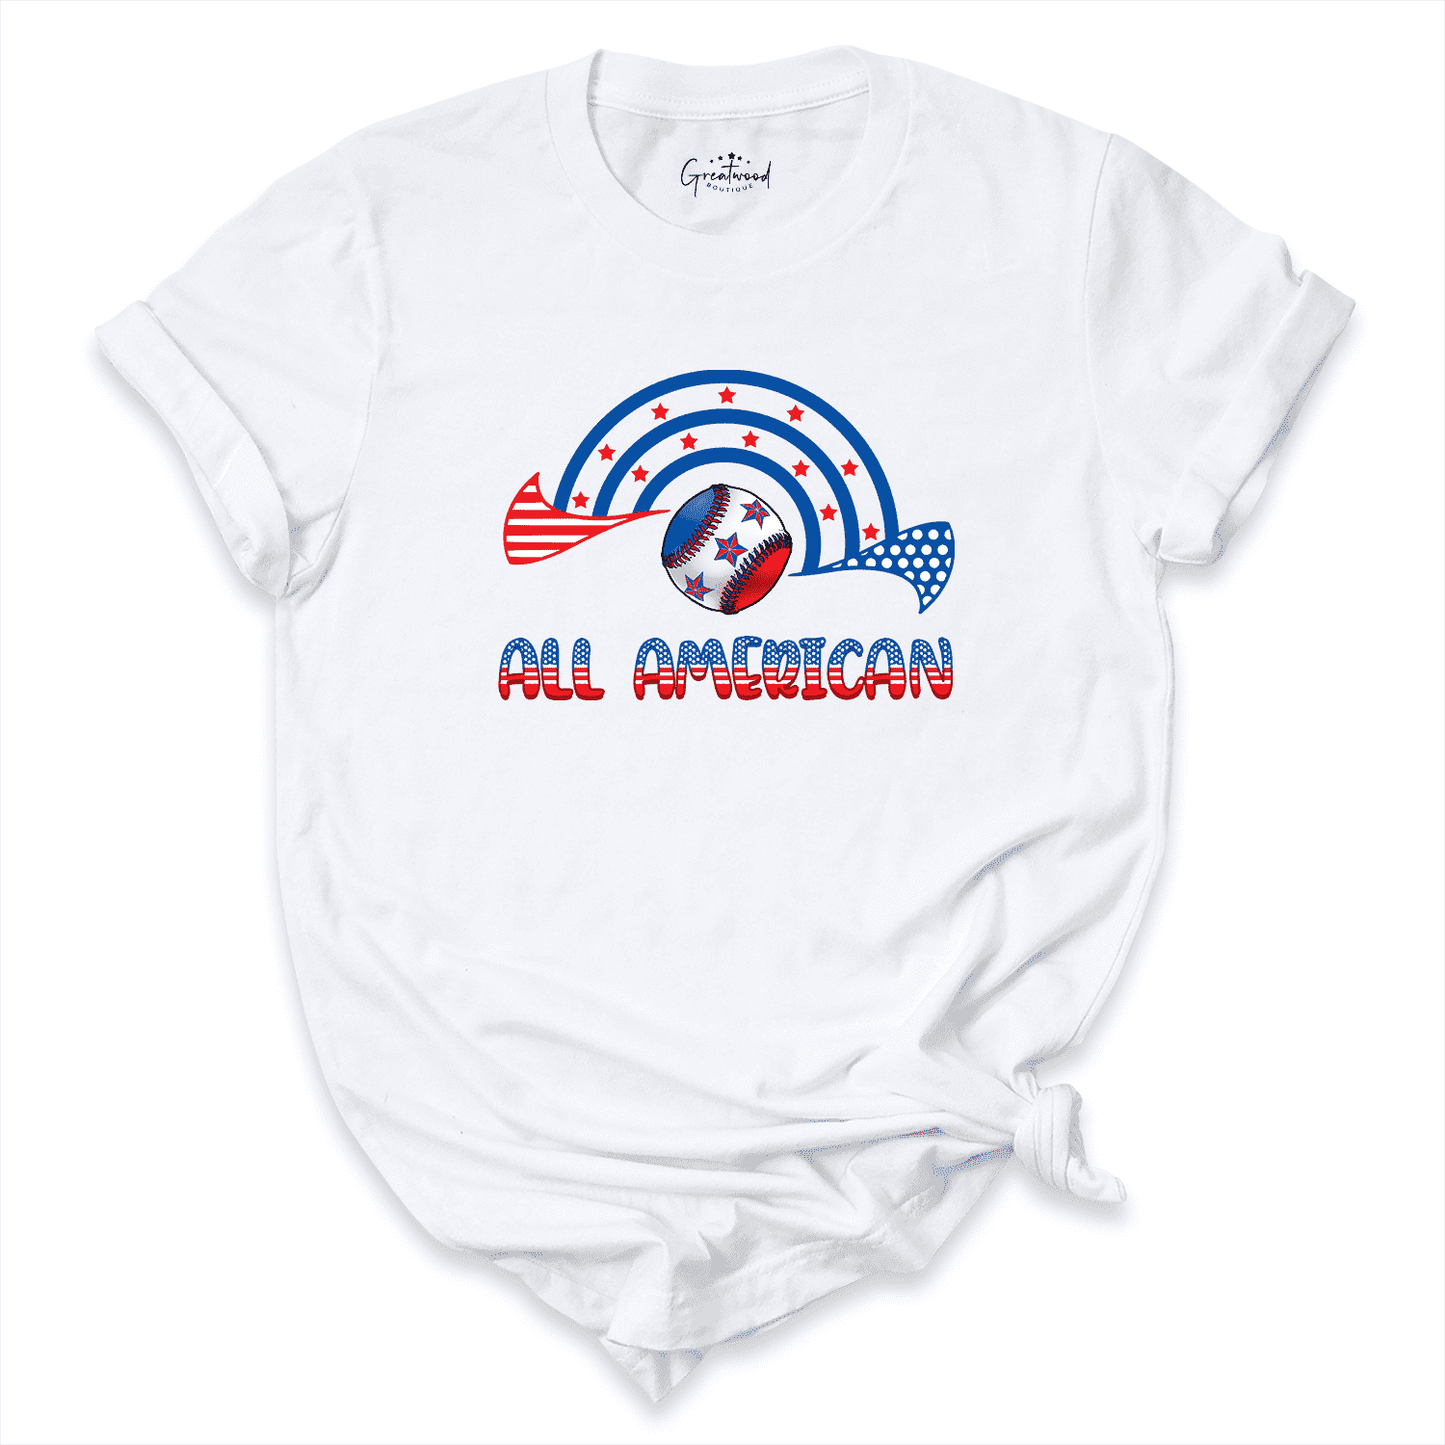 All American Baseball Shirt White - Greatwood Boutique